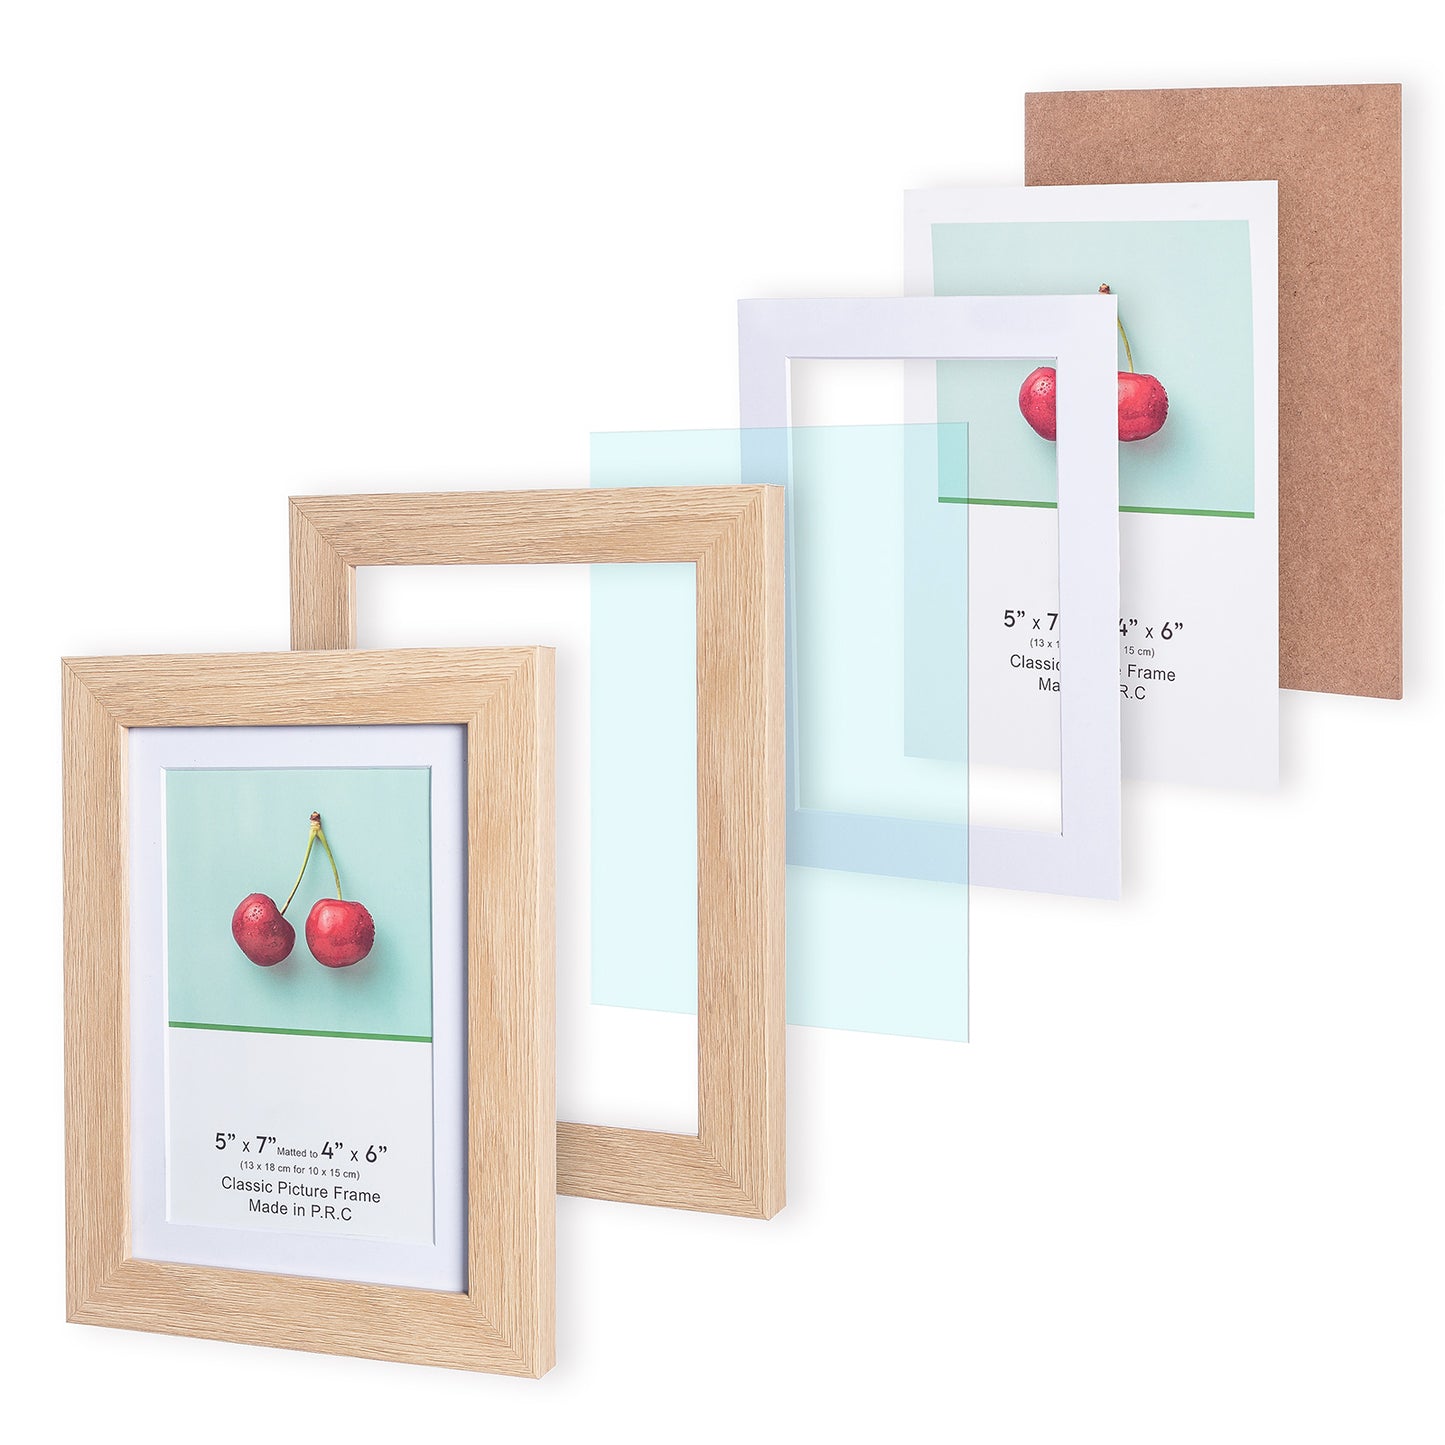 5" x 7" Classic Natural Oak MDF Wood Picture Frame with Tempered Glass, 4" x 6" Matted